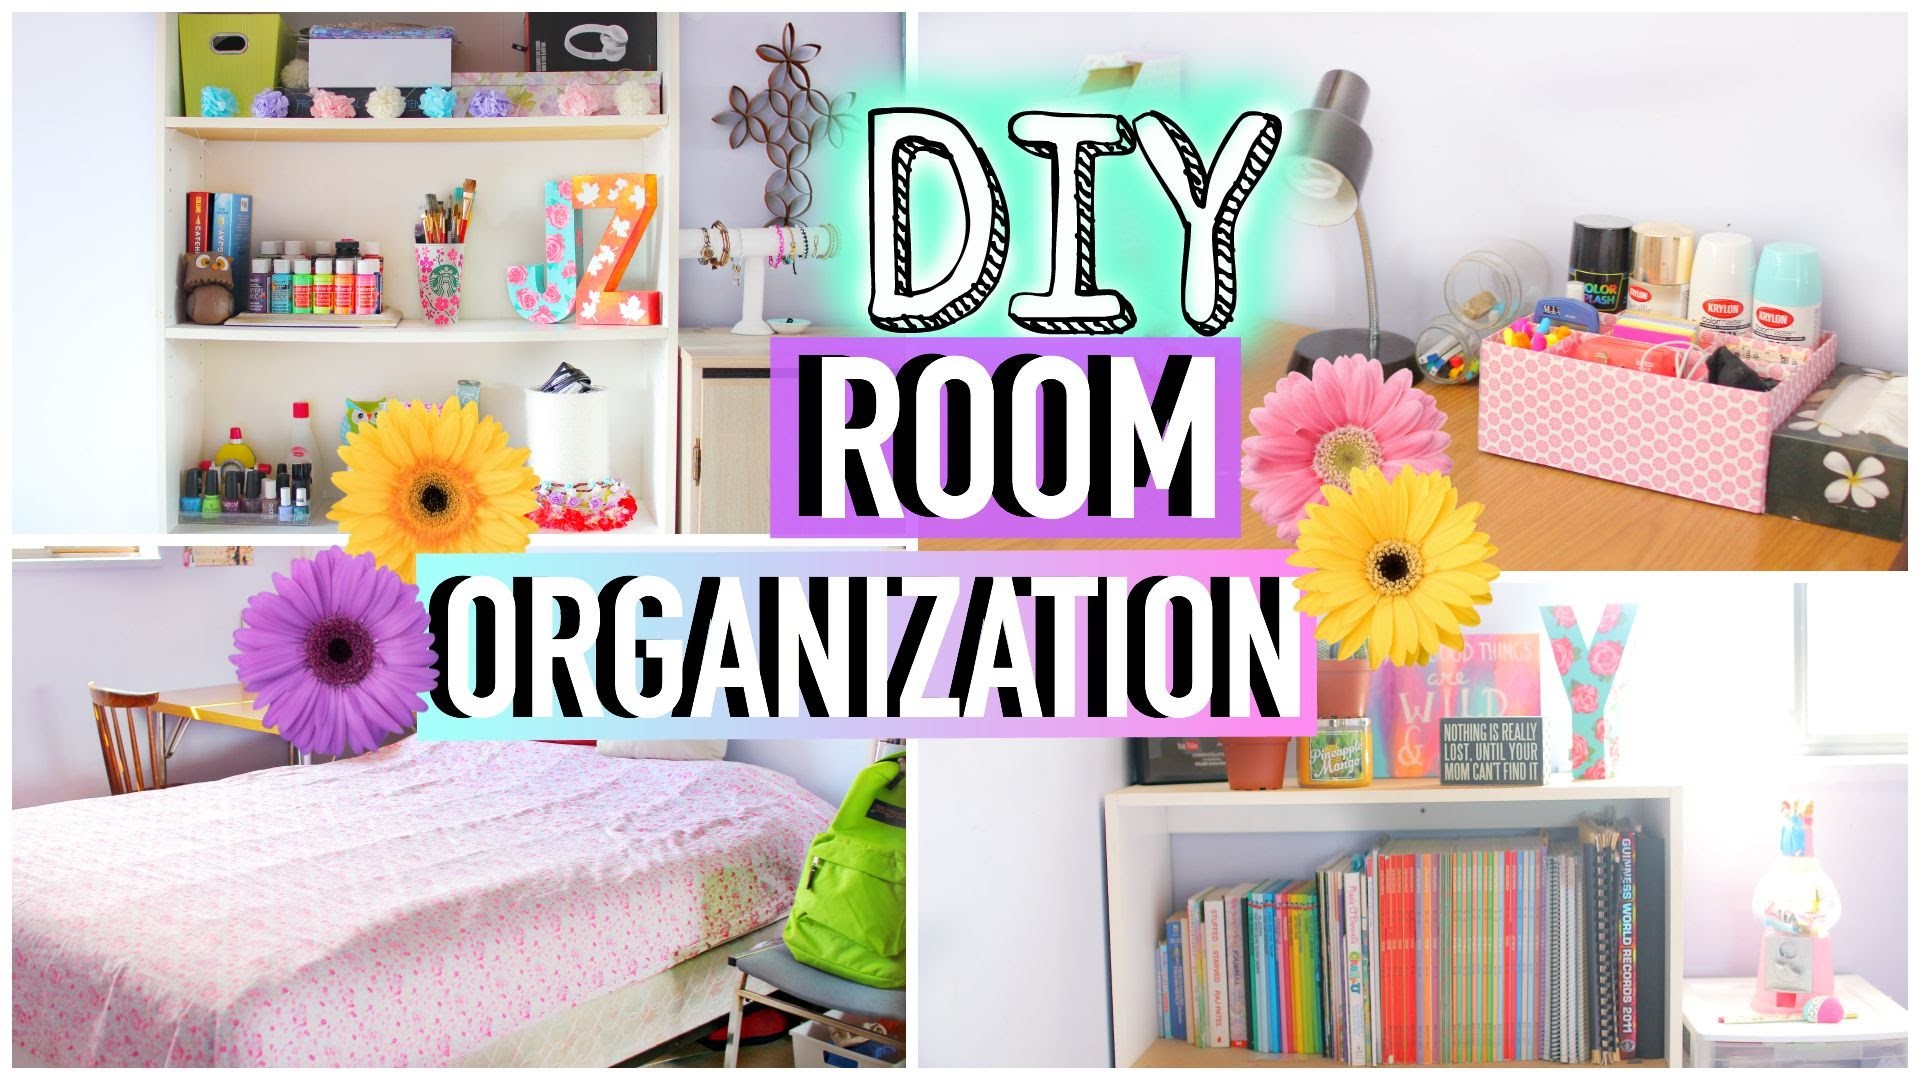 This room clean every. DIY для комнаты. Clean your Room. Room Decor Organization. Картинки clean my Bedroom.